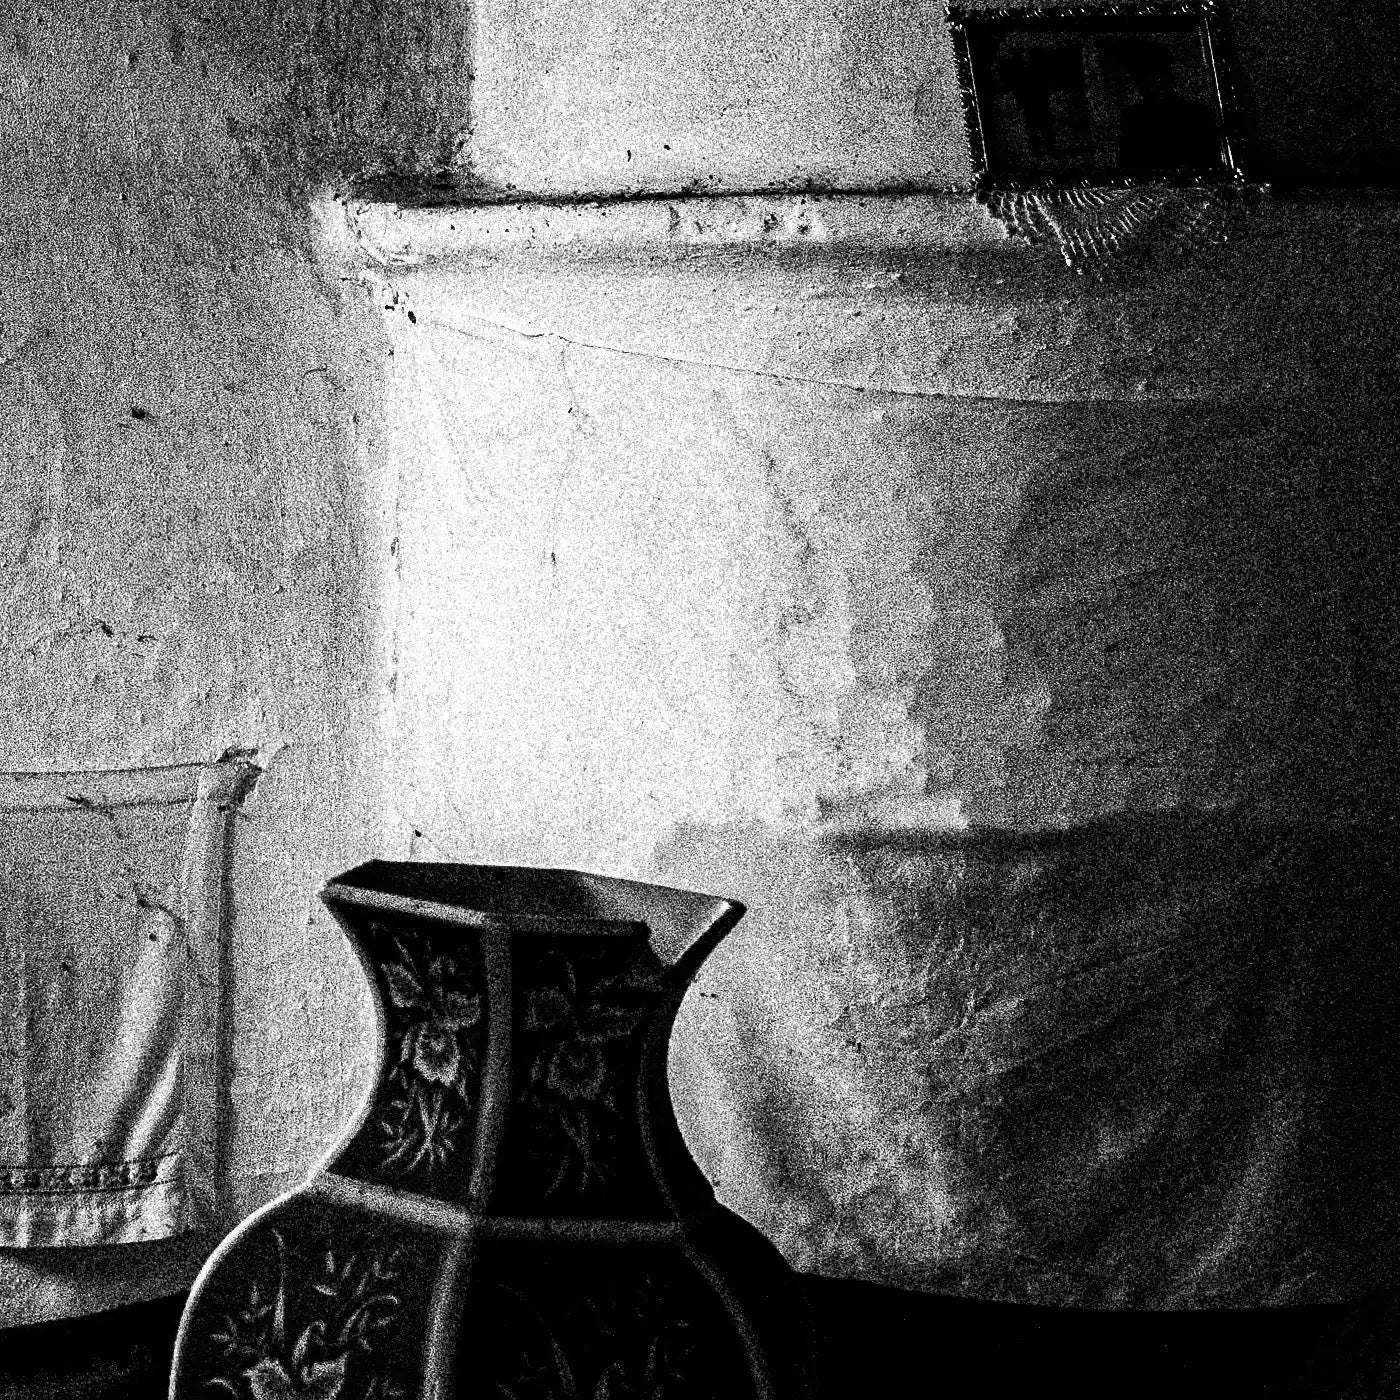 Filiates, Thesprotia, Epirus, Greece | Interior with Fireplace | Black-and-White Wall Art Photography - details